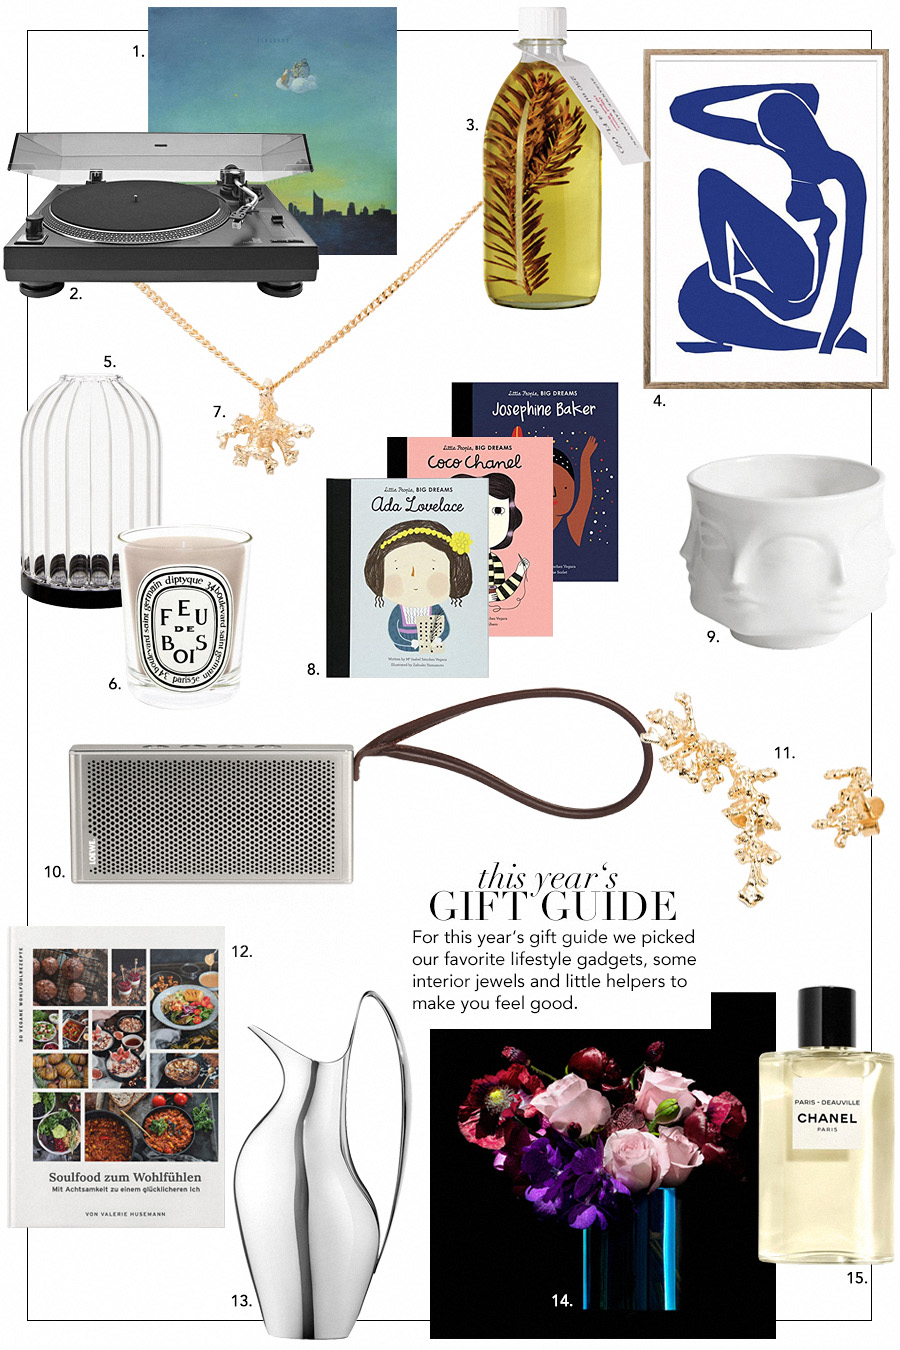 Gift Guide 2018: Gadgets, Interior Jewels and Gifts for Body & Soul